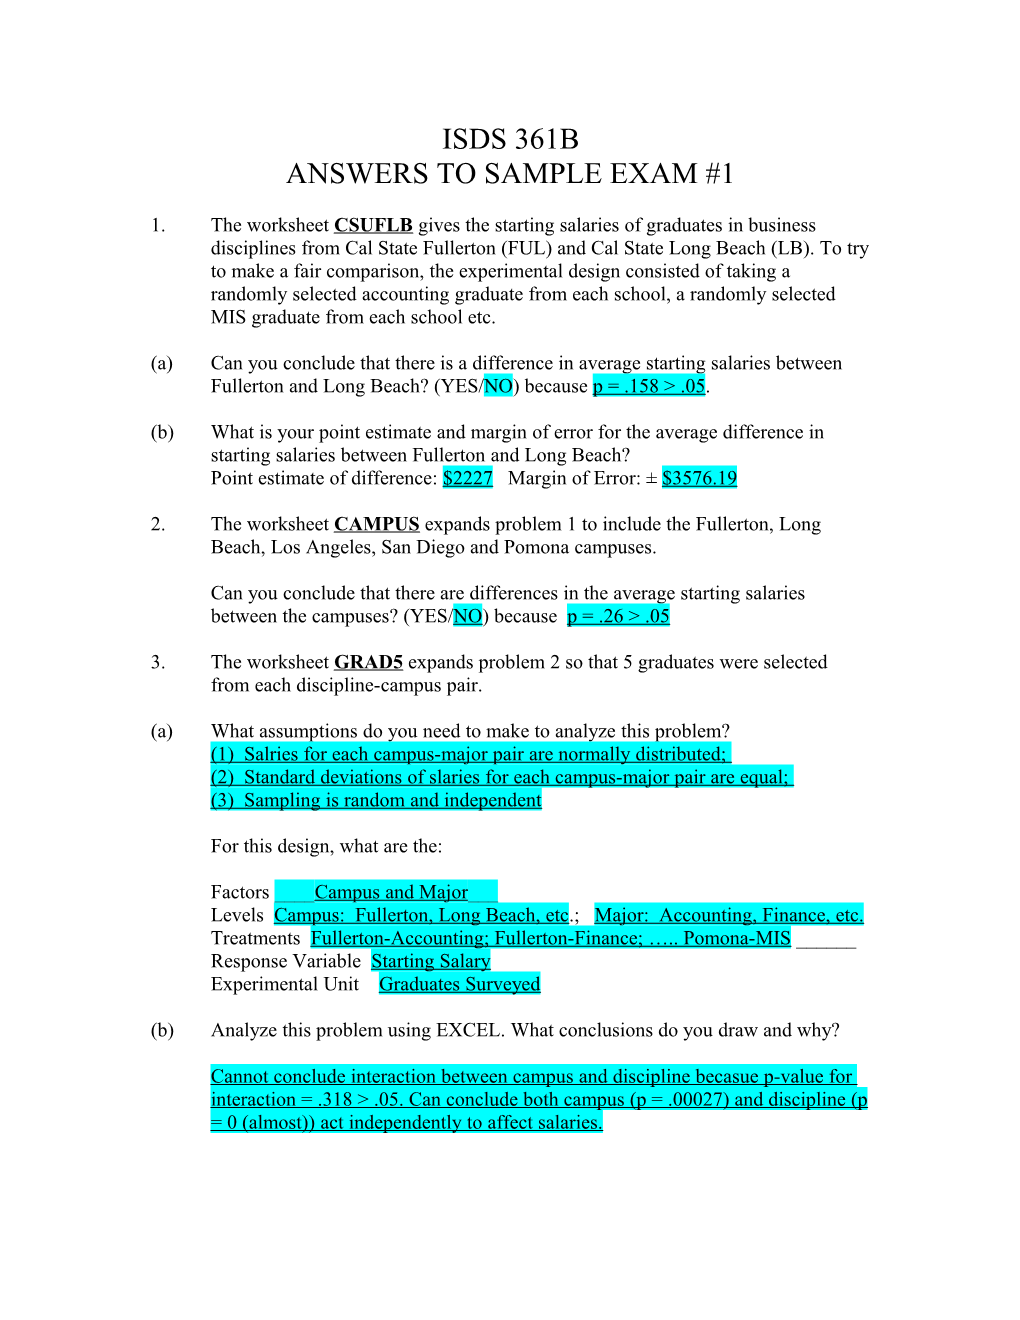 Answers to Sample Exam #1